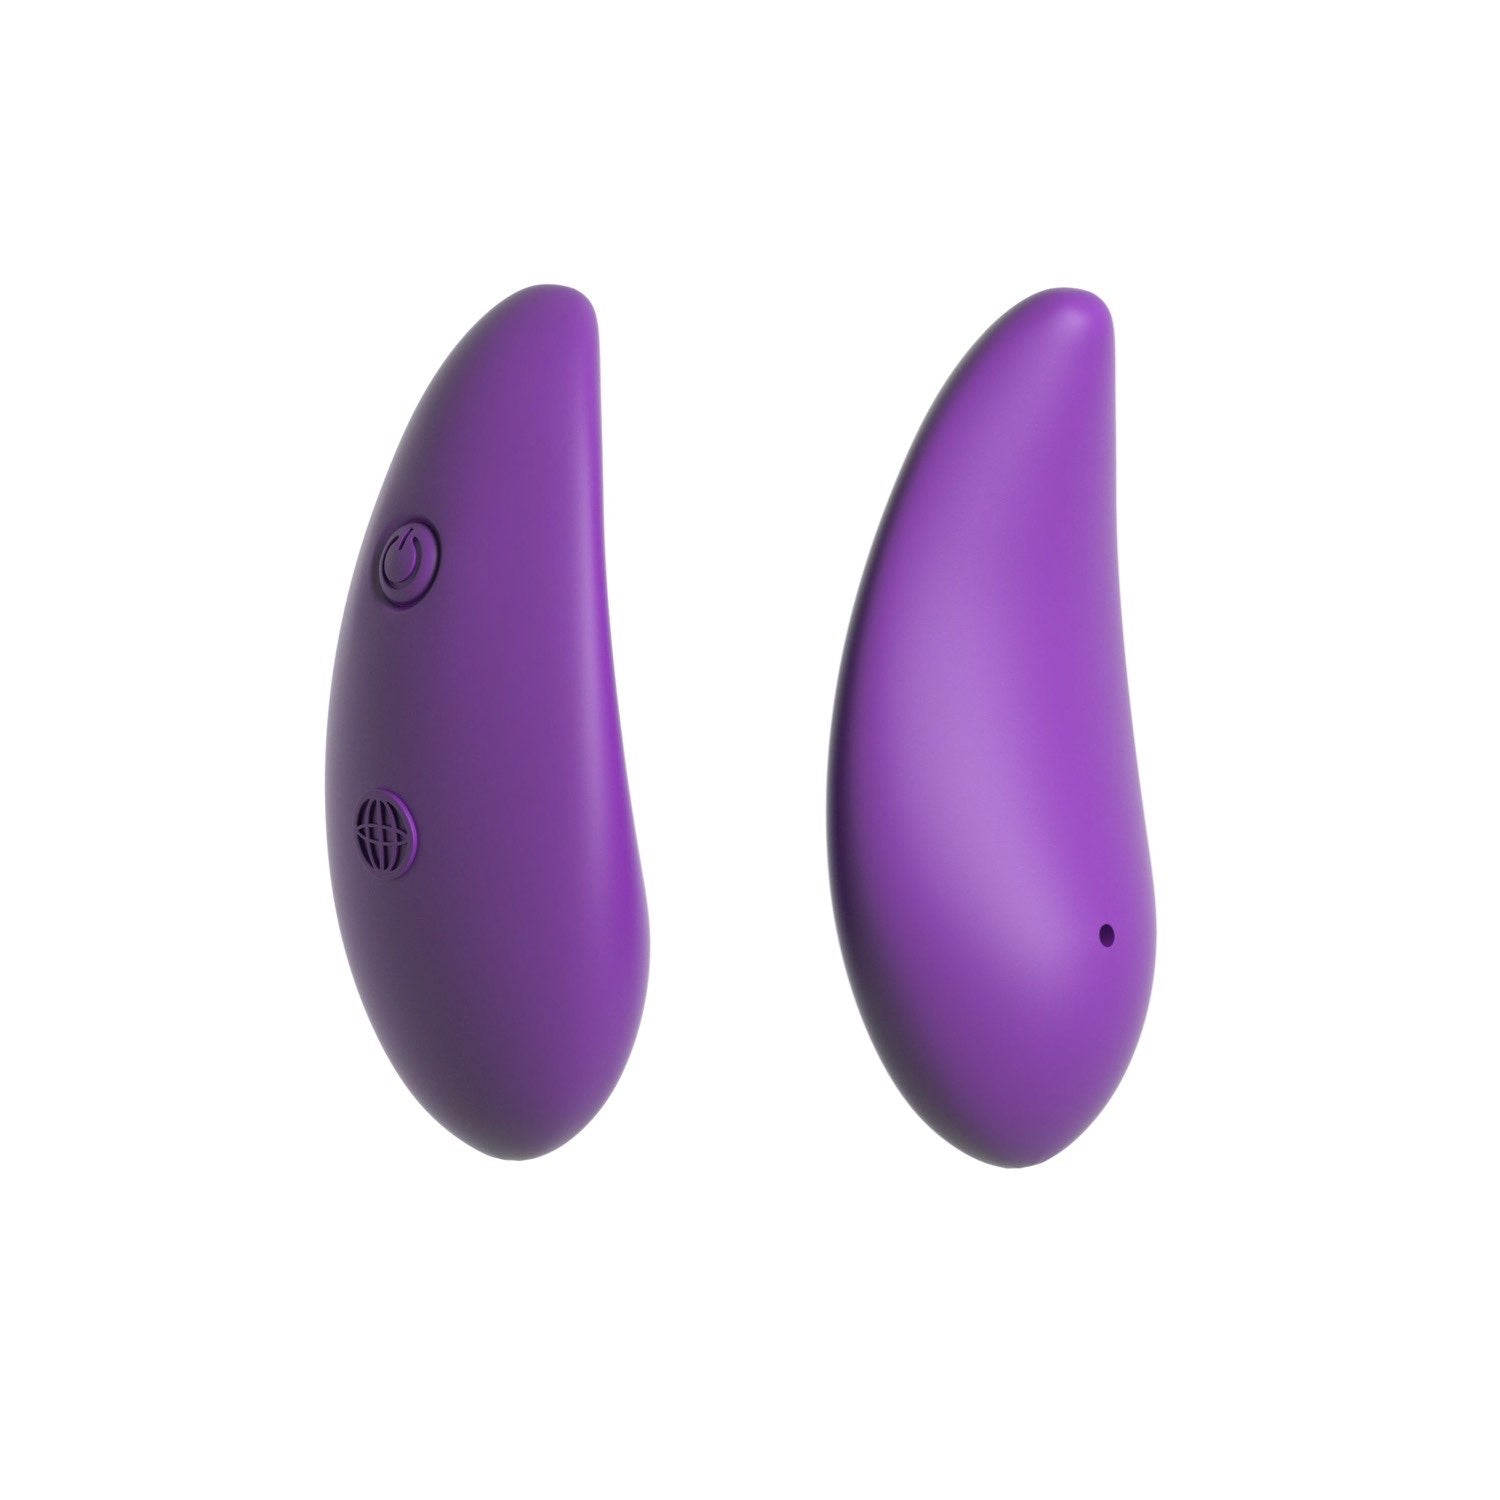 Fantasy C-Ringz Fantasy C-ringz Reomote Control Rabbit Ring - Purple Vibrating Cock &amp; Balls Ring with Remote Control by Pipedream